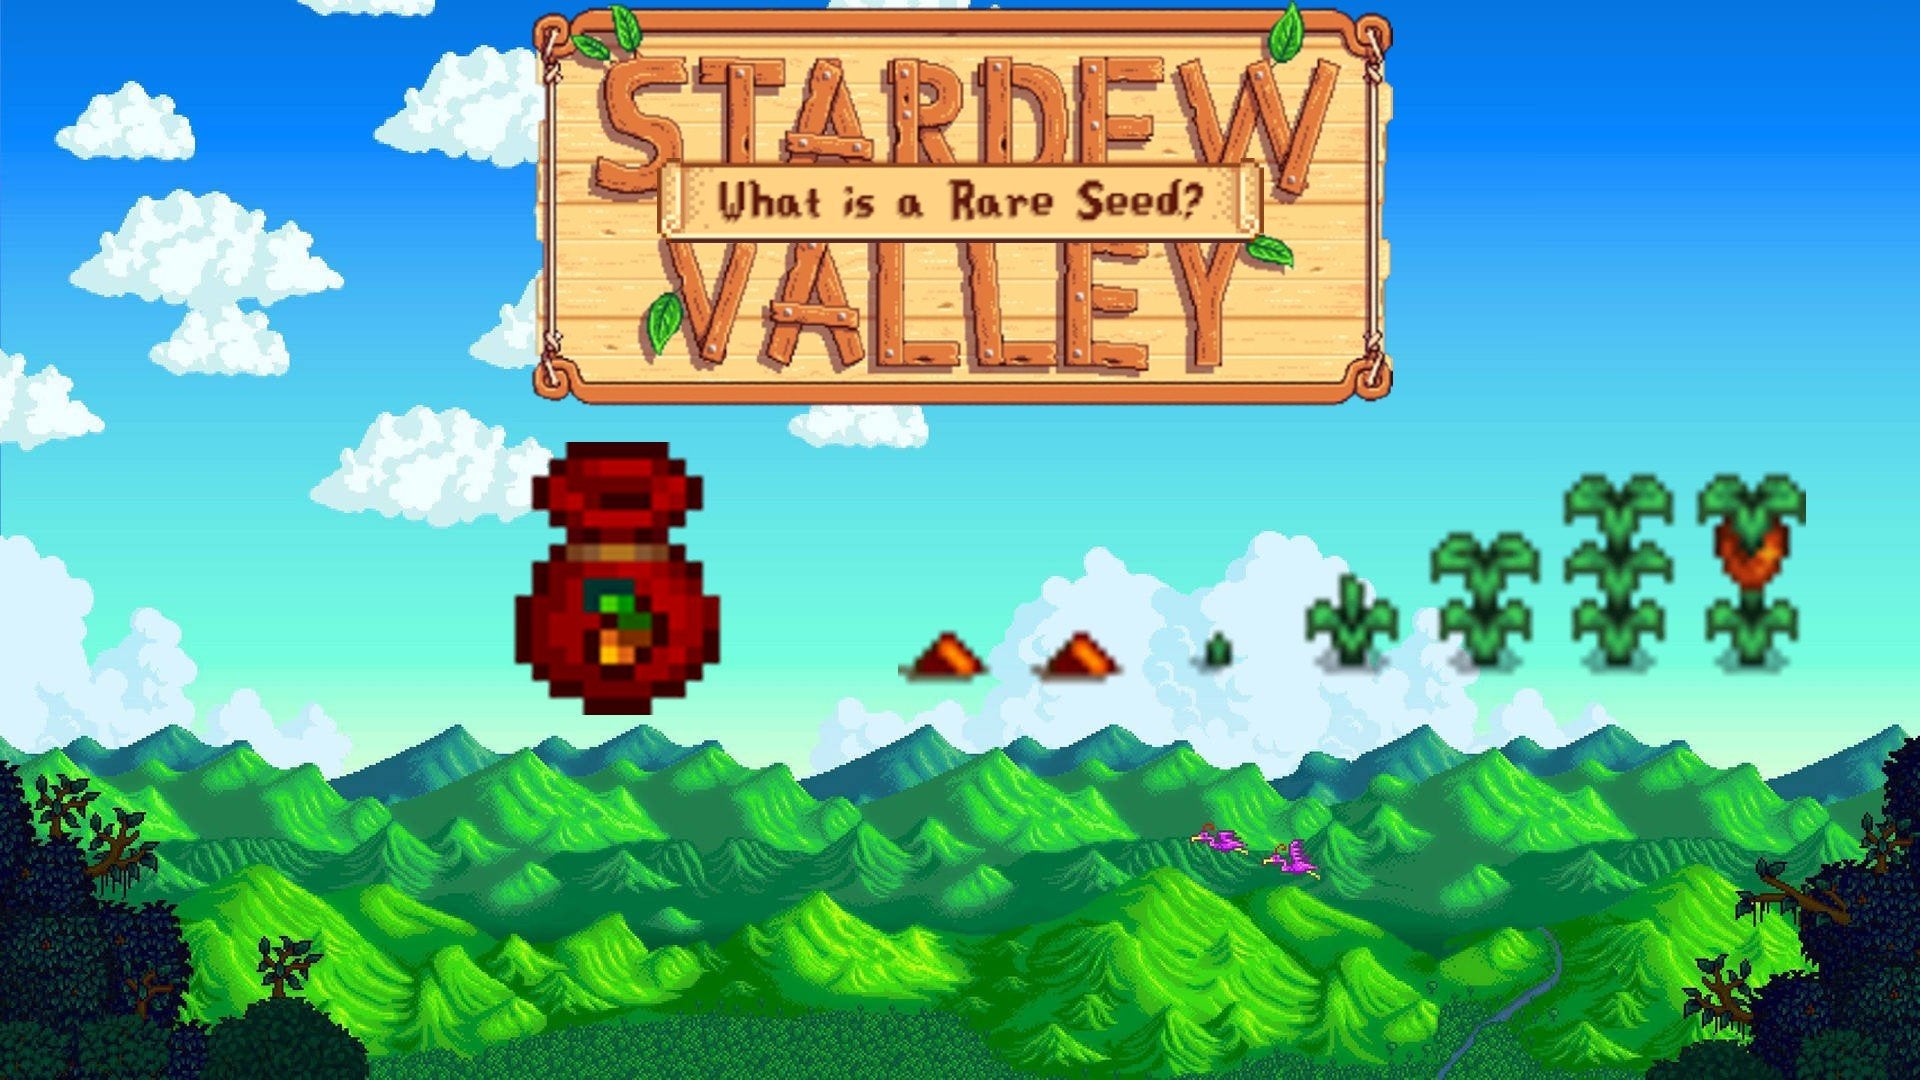 The default Stardew Valley background with the sprites for a Rare Seed and its growth stages.